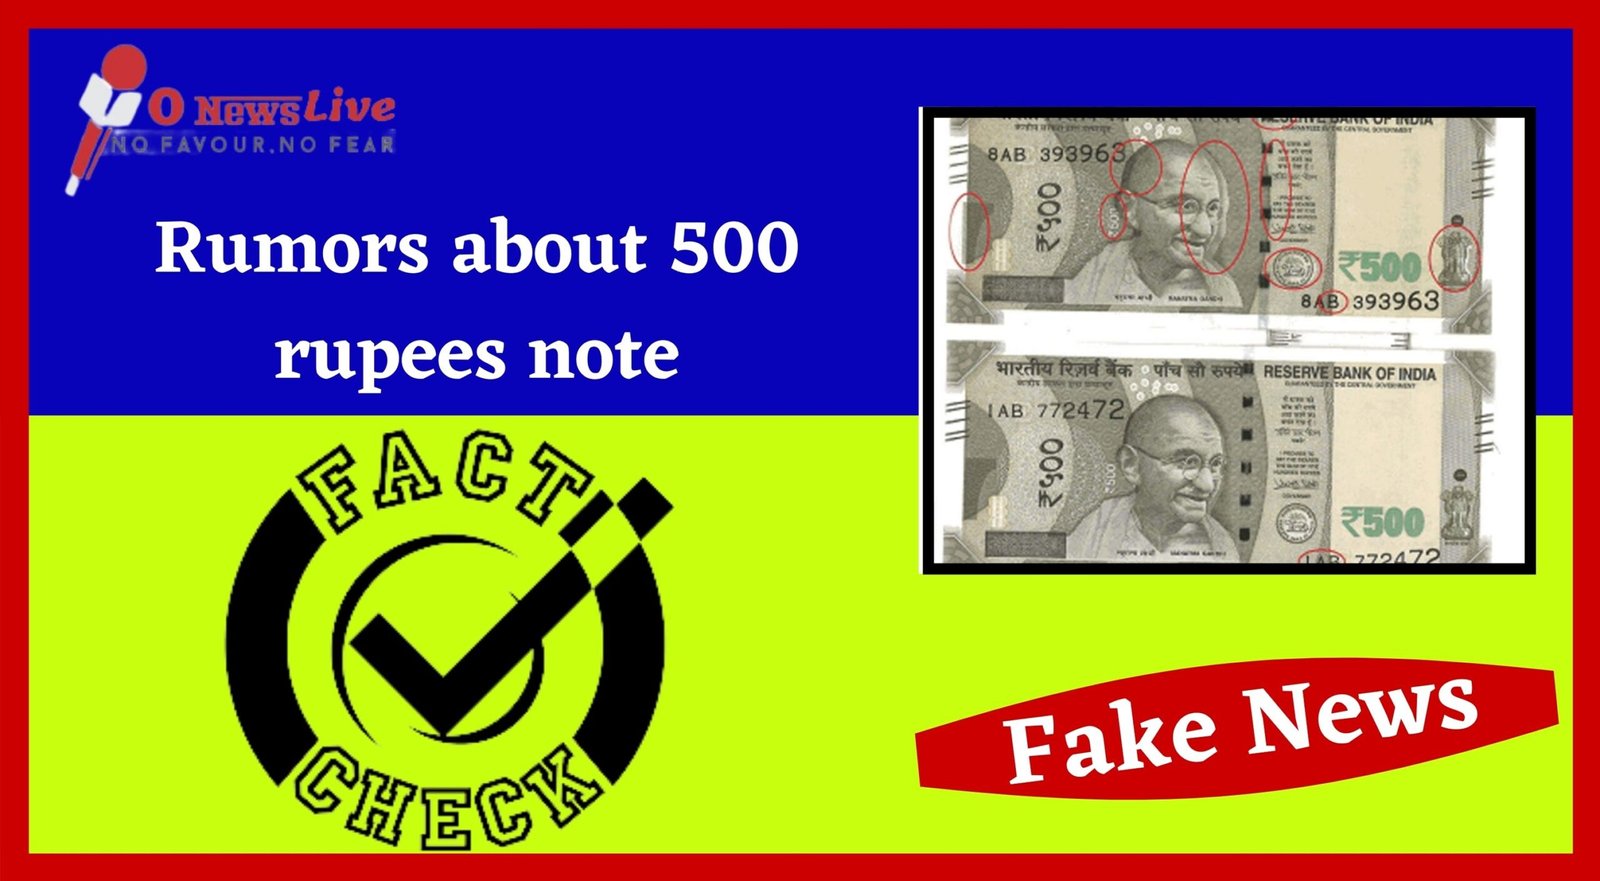 Rumors about 500 rupees note